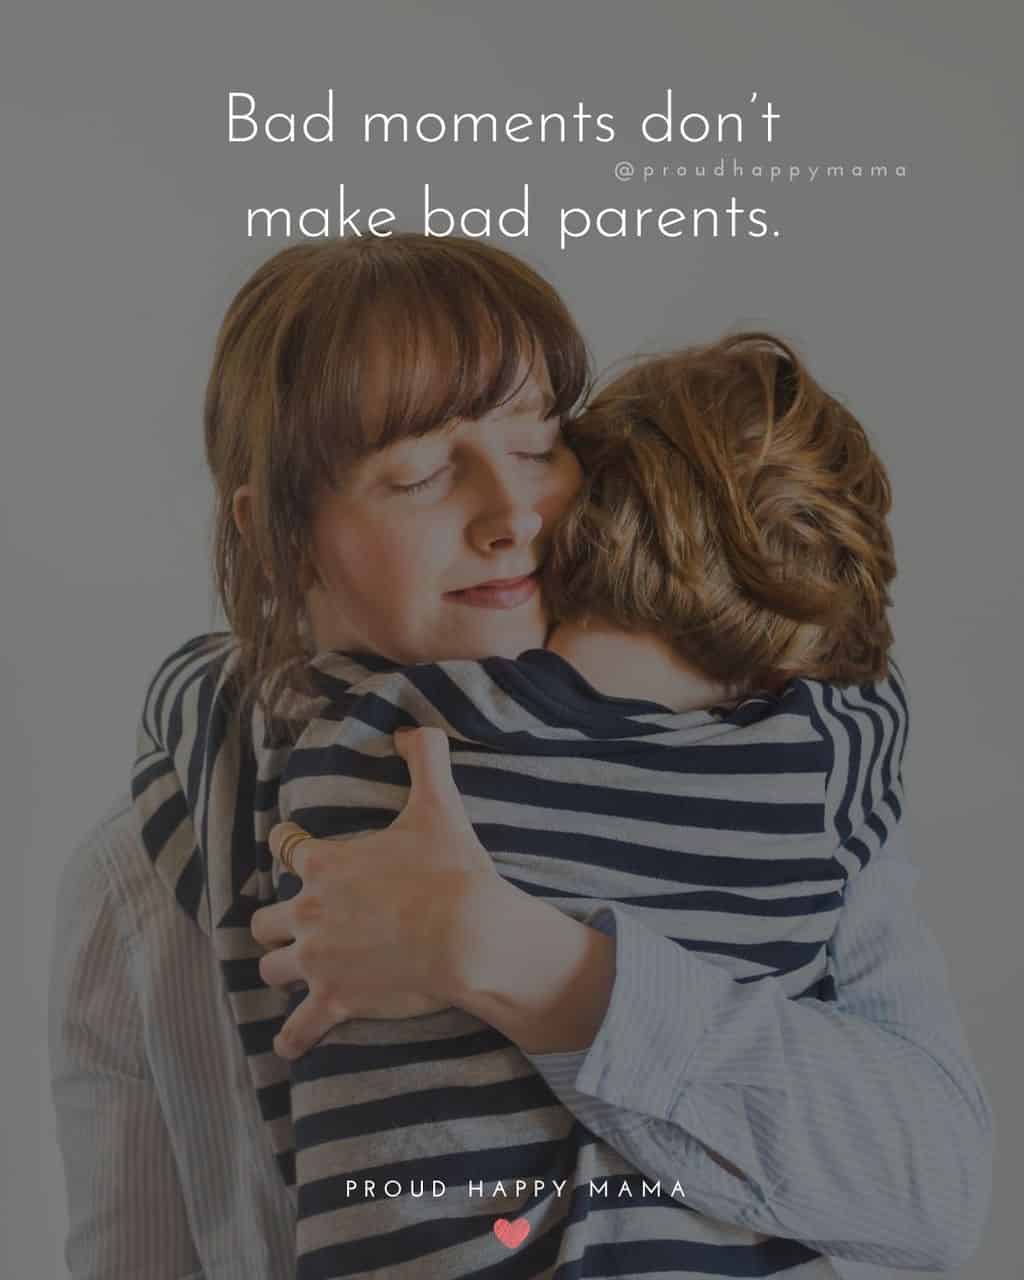 Parenting Quotes - Bad moments don’t make bad parents.’